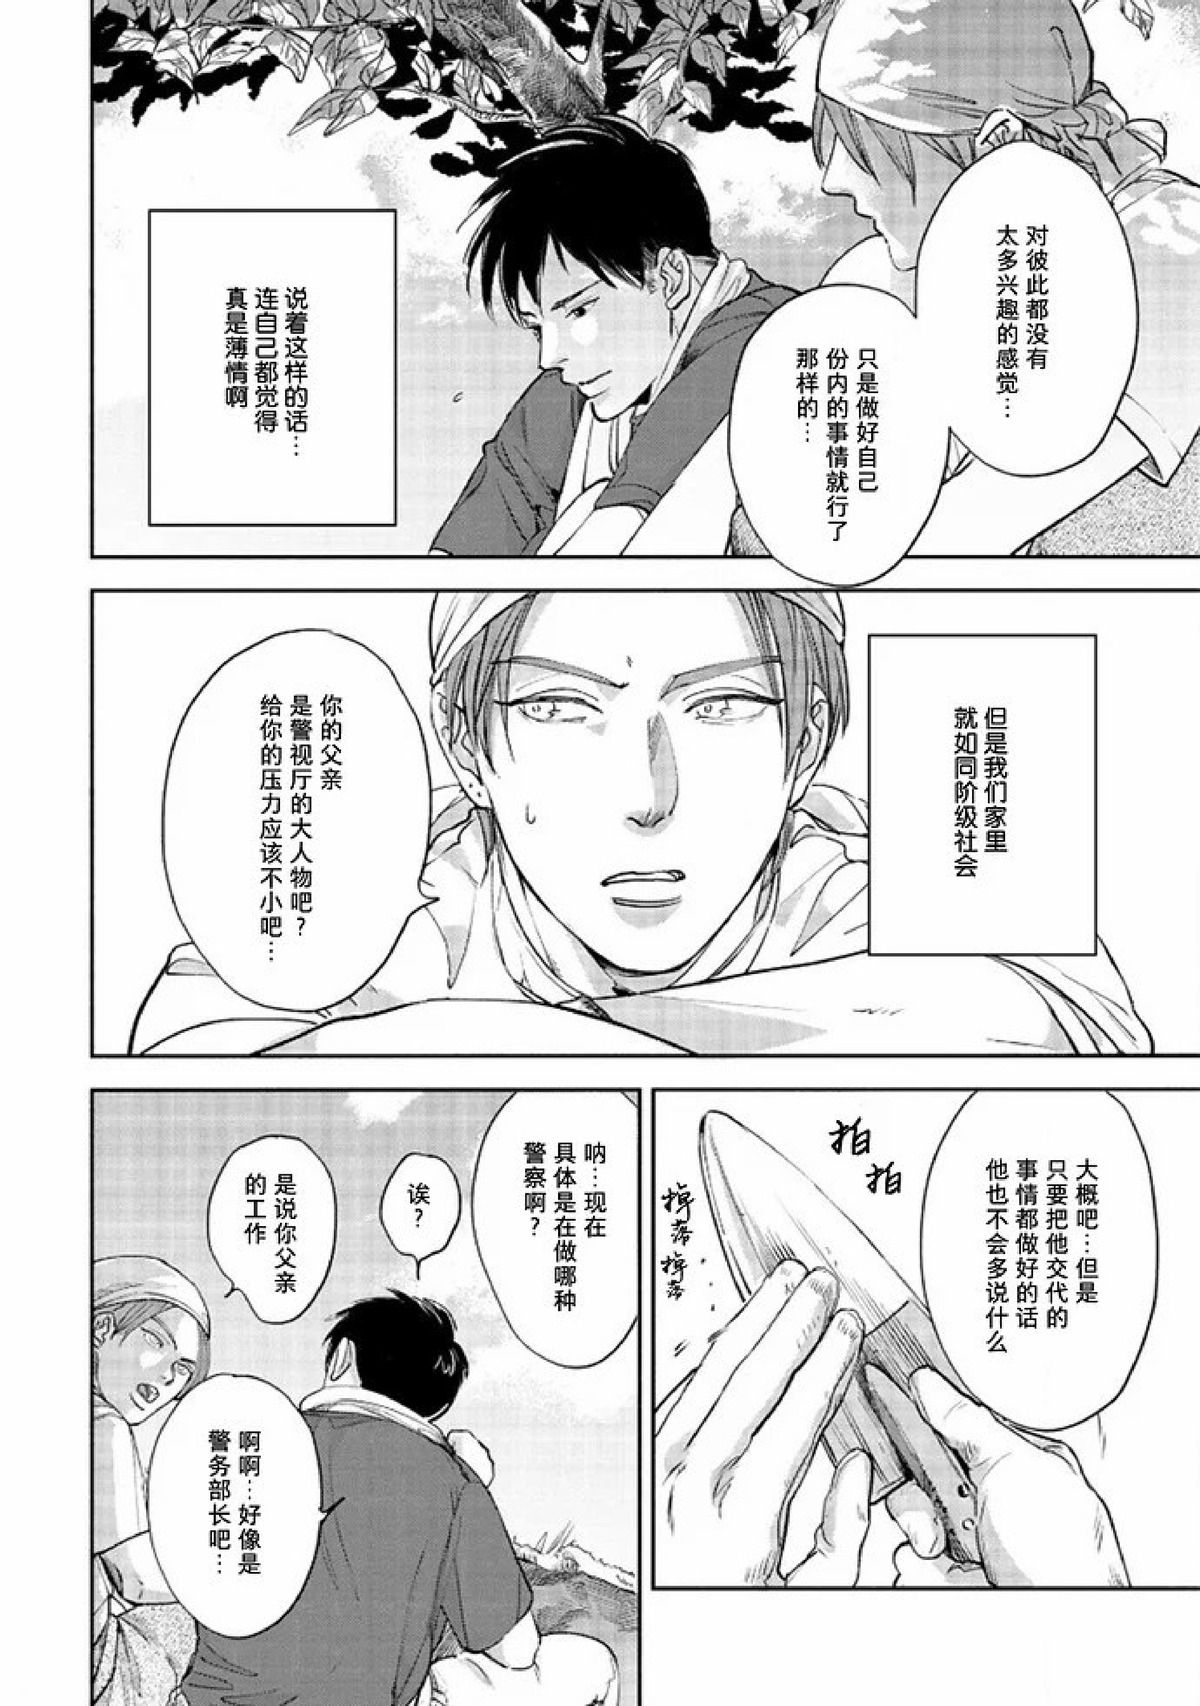 【Two sides of the same coin[腐漫]】漫画-（上卷01-02）章节漫画下拉式图片-18.jpg